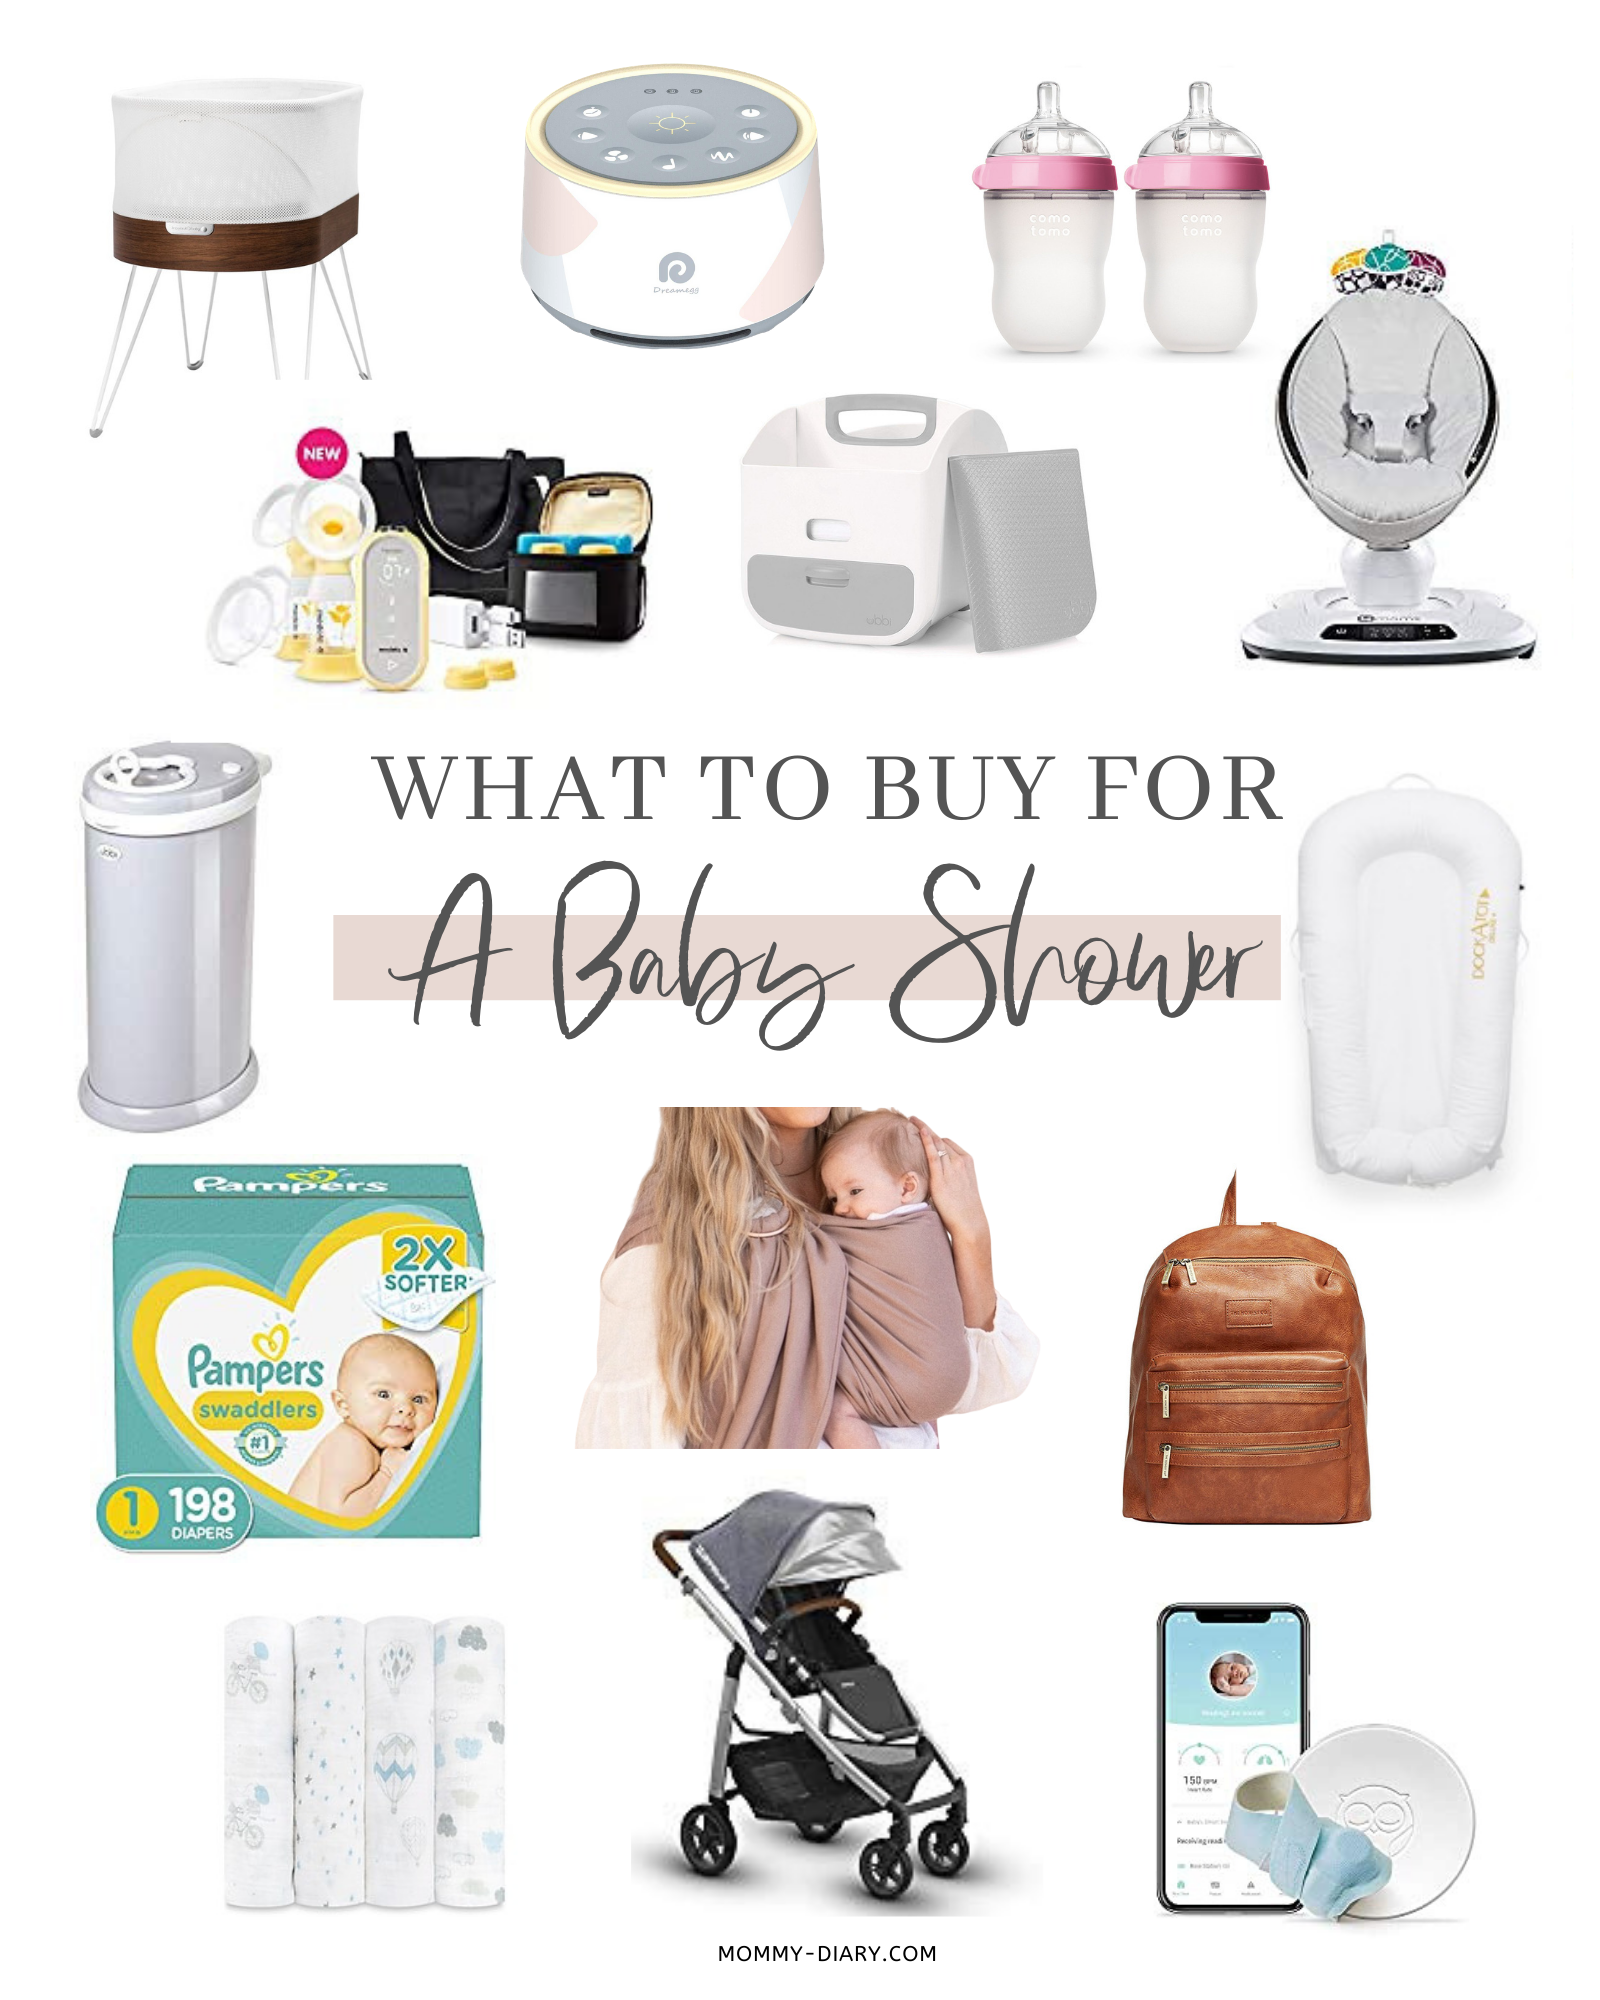 What to Buy for a Baby Shower